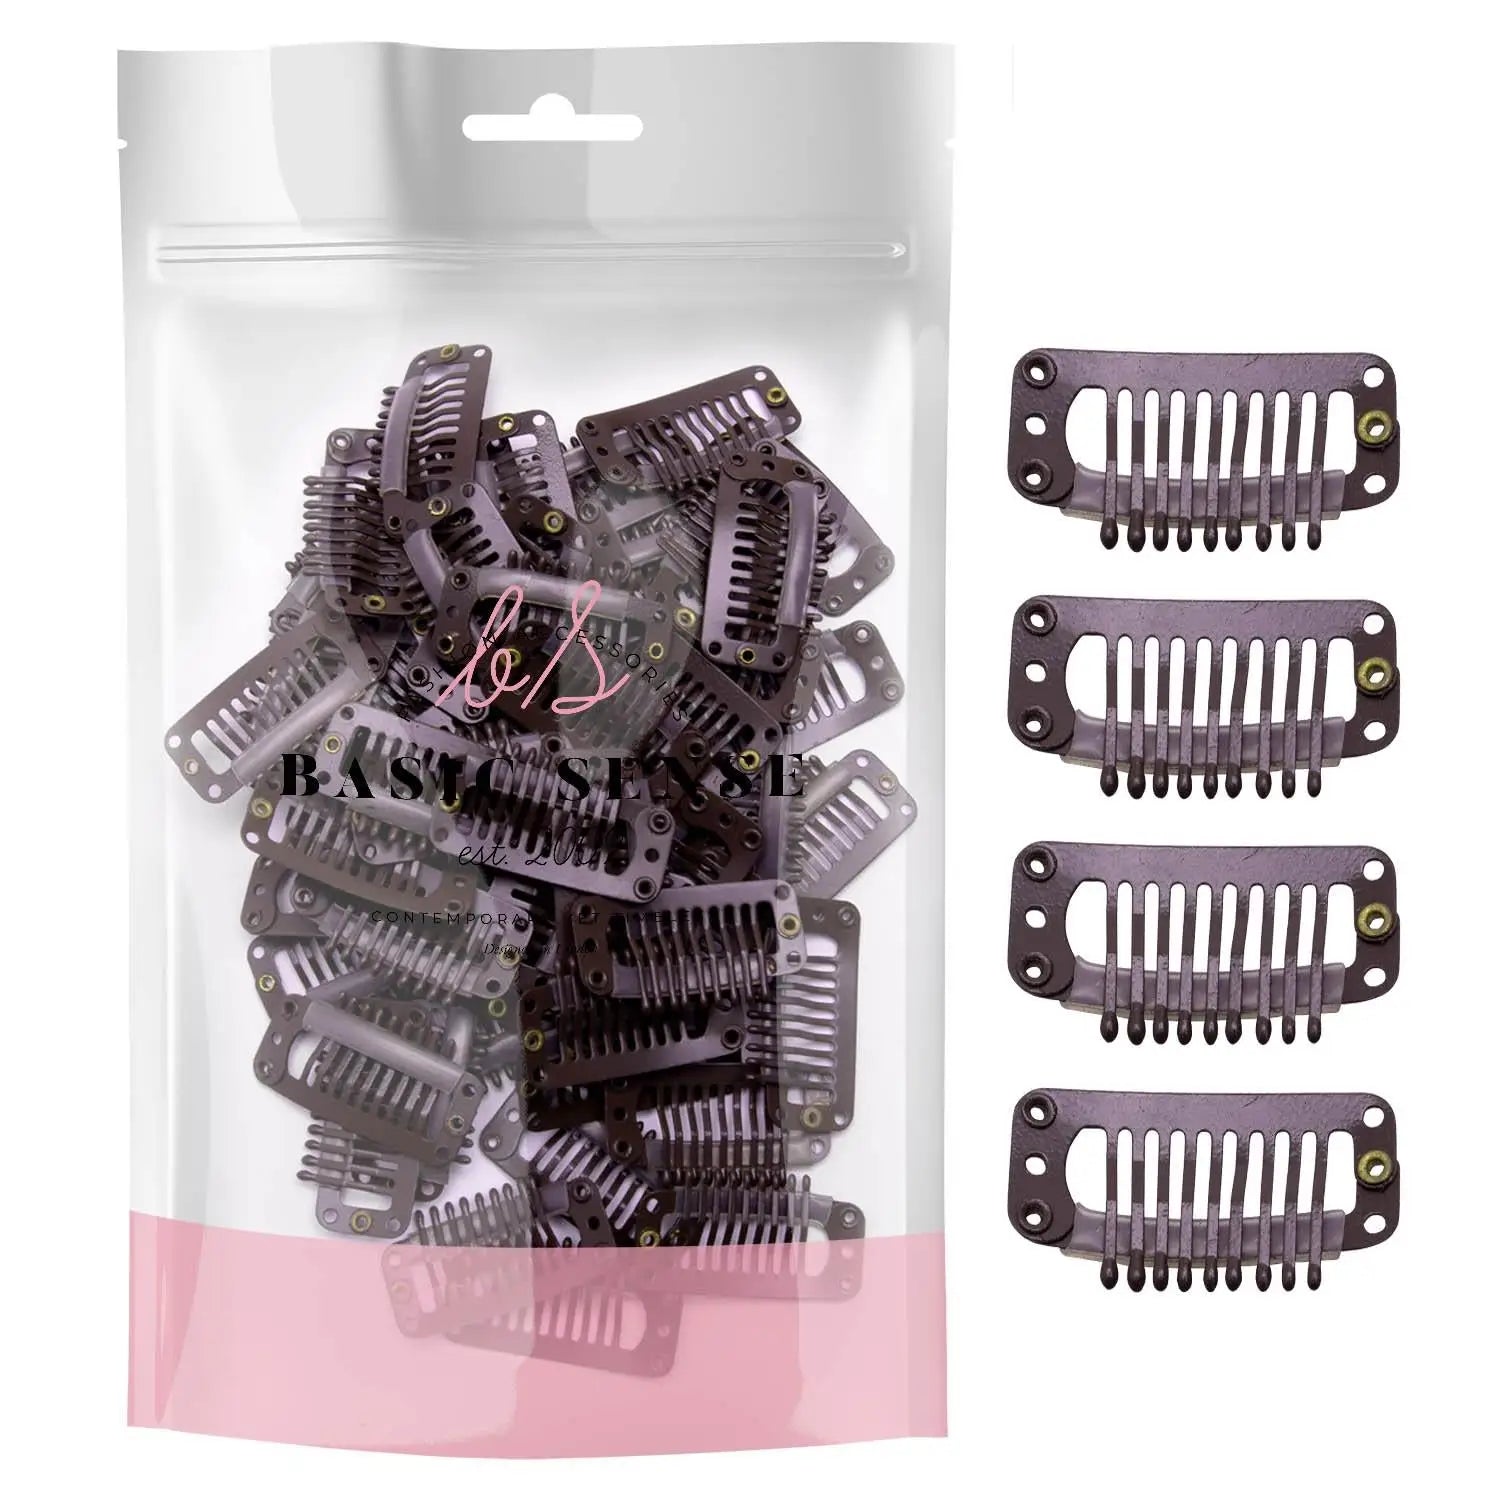 Hair Extension Snap Clips Set with Pink Bag - Metal snap clips and hair extensions packed together.